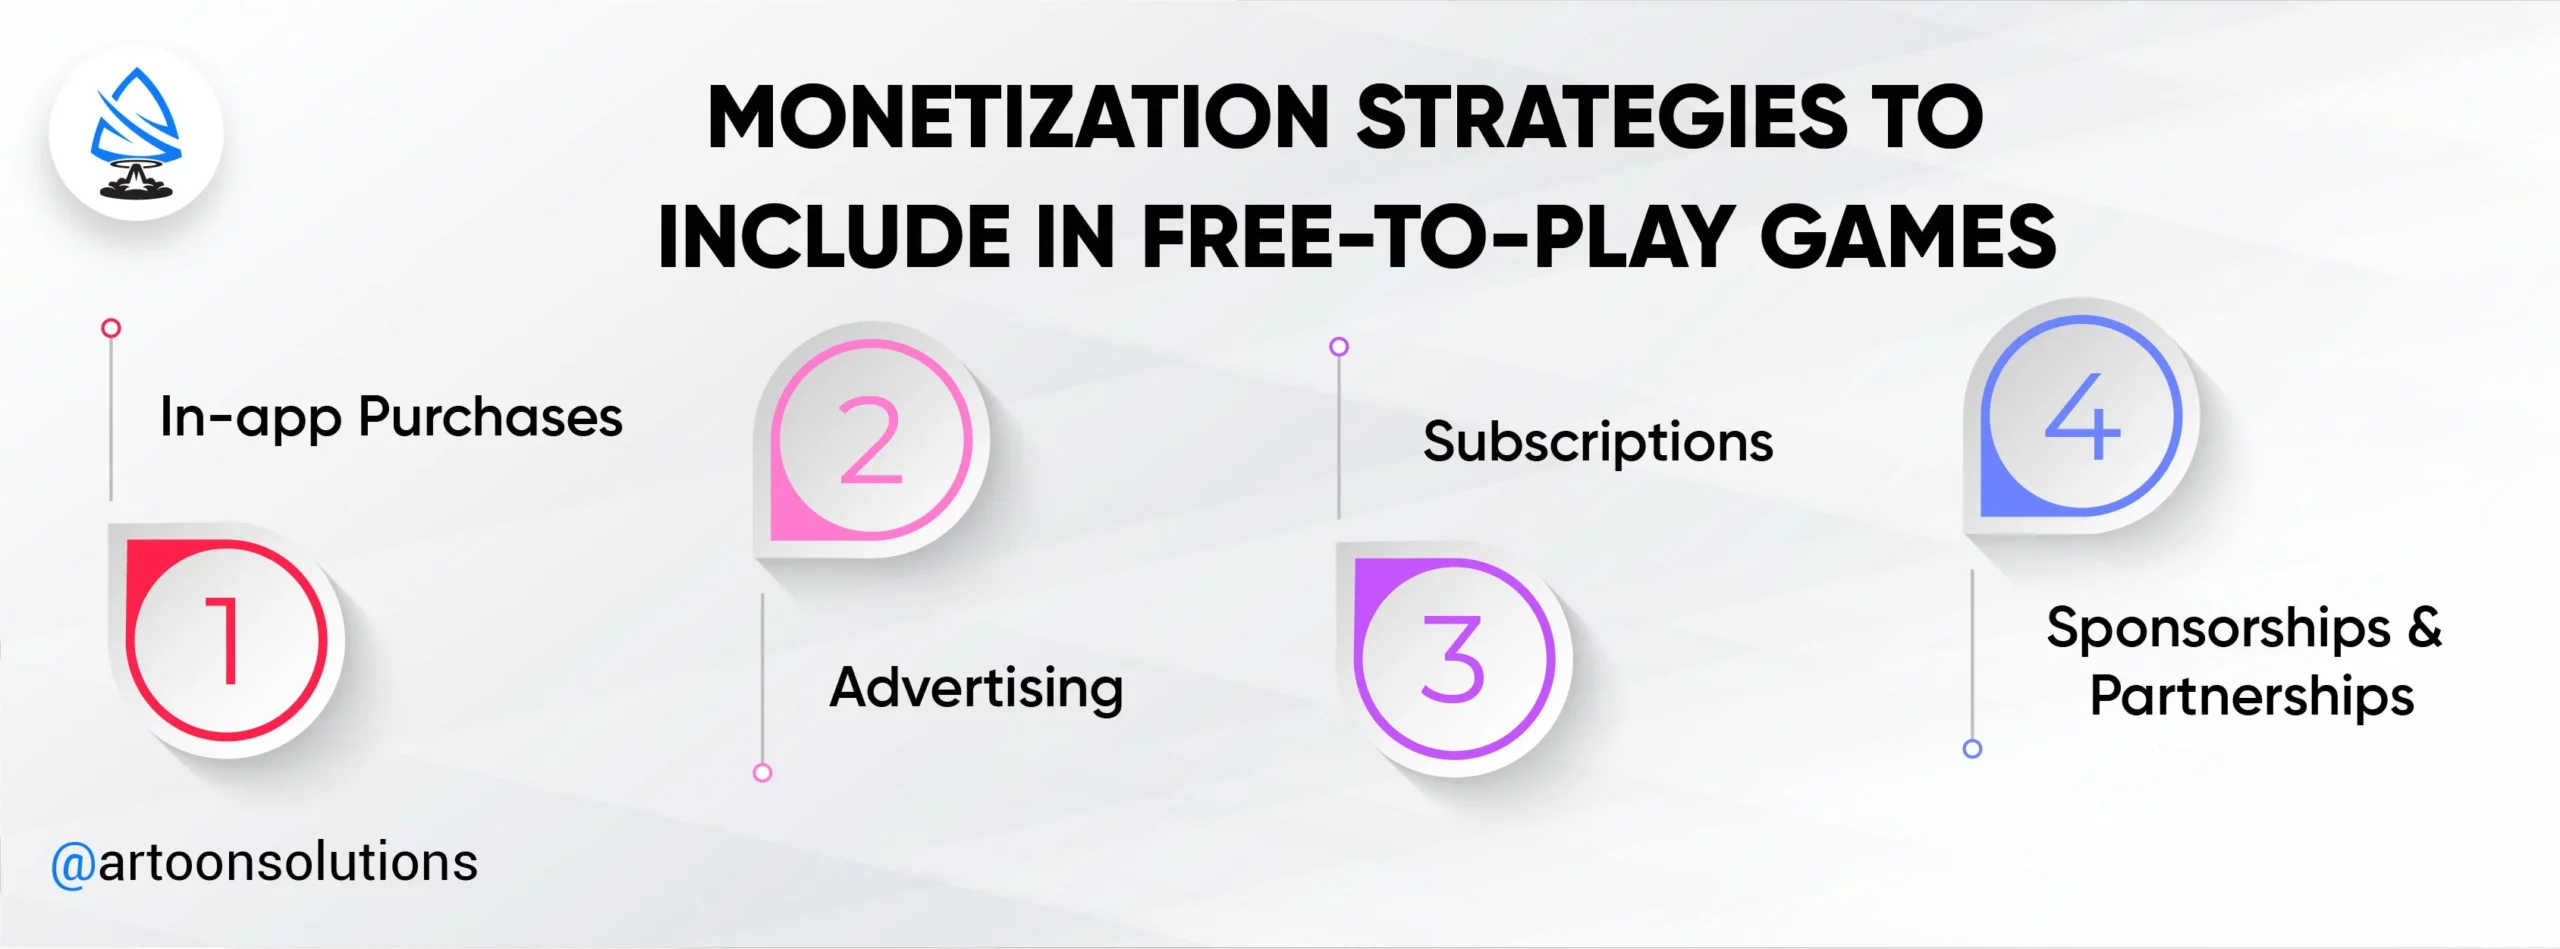 Monetization Strategies to Include in Free-to-Play Games